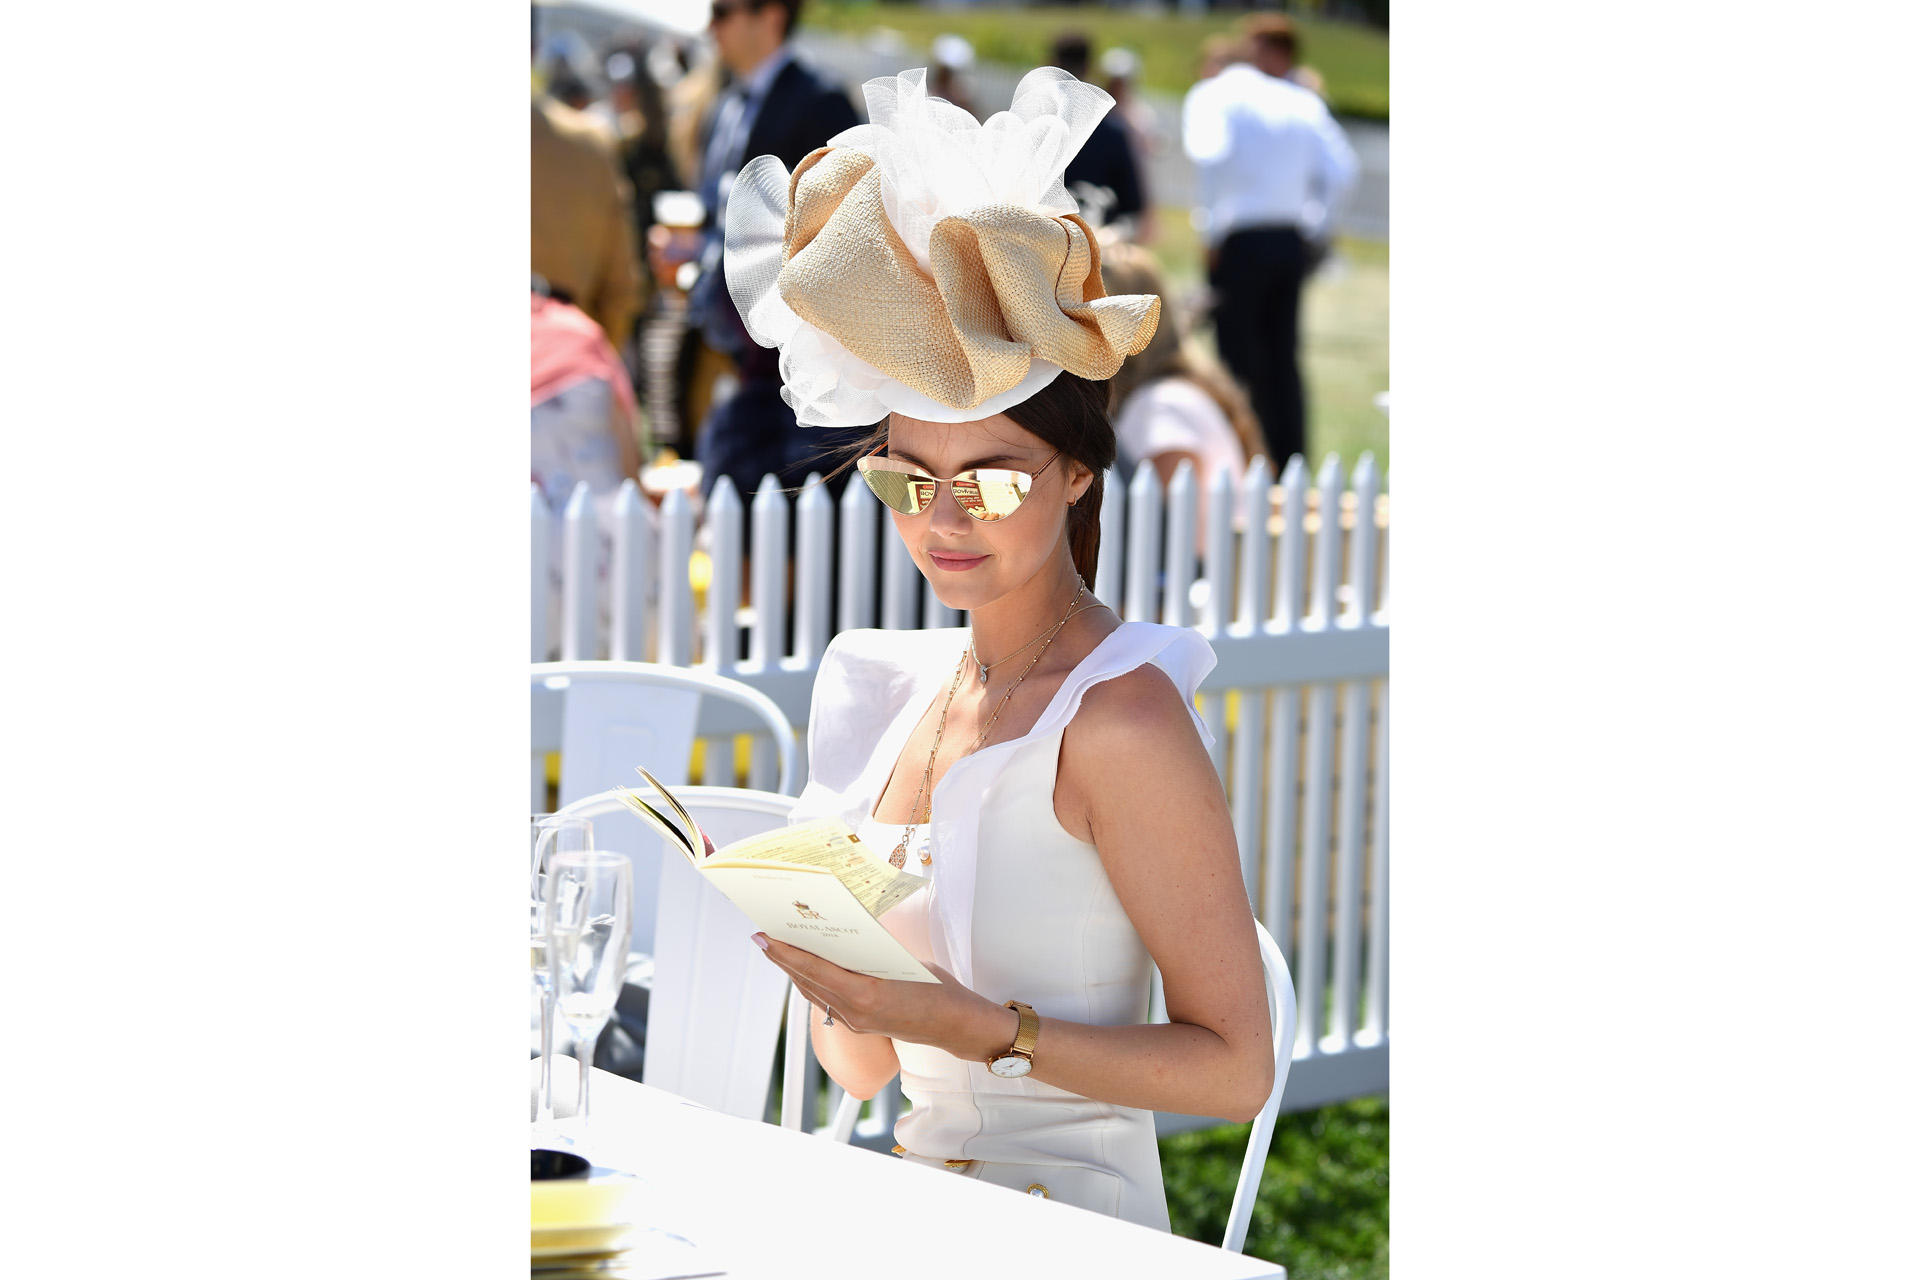 Stephanie Peers attends day 3 of Royal Ascot on 21 June 2018